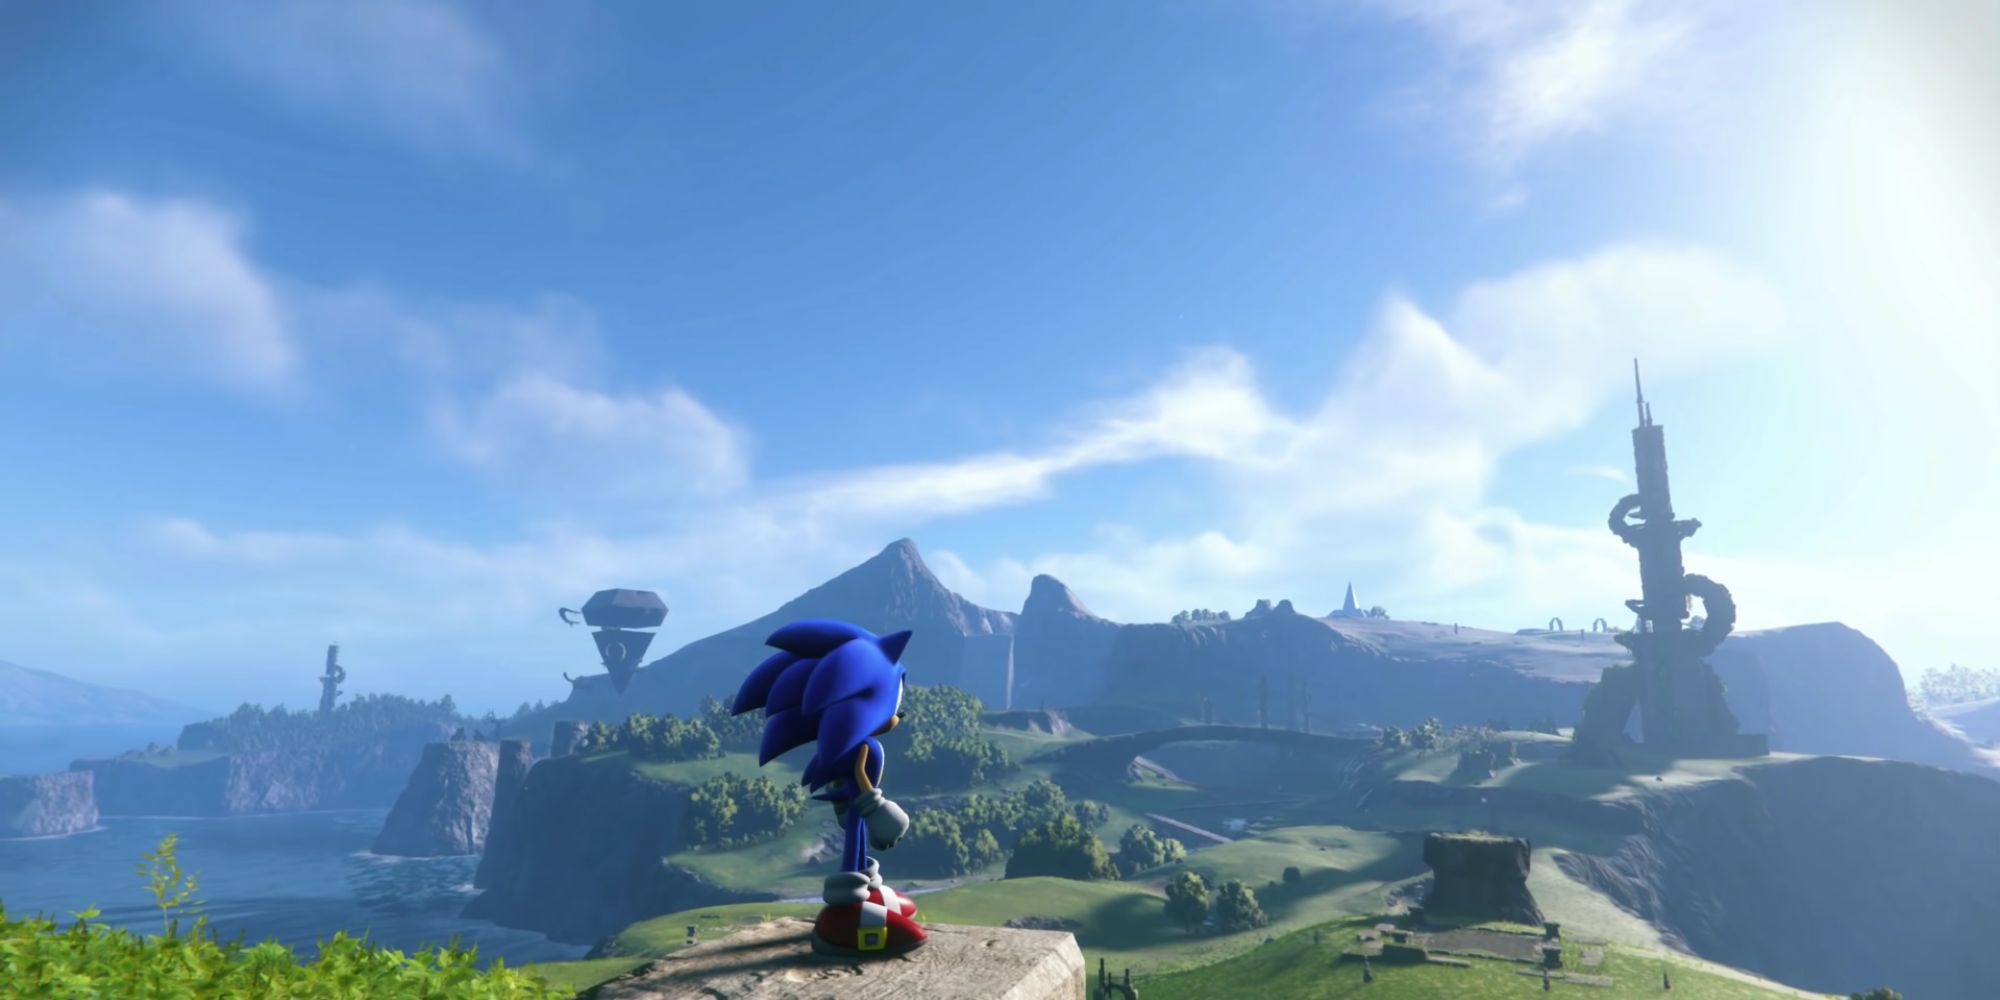 prompthunt: Sonic the hedgehog with a flamethrower, award winning